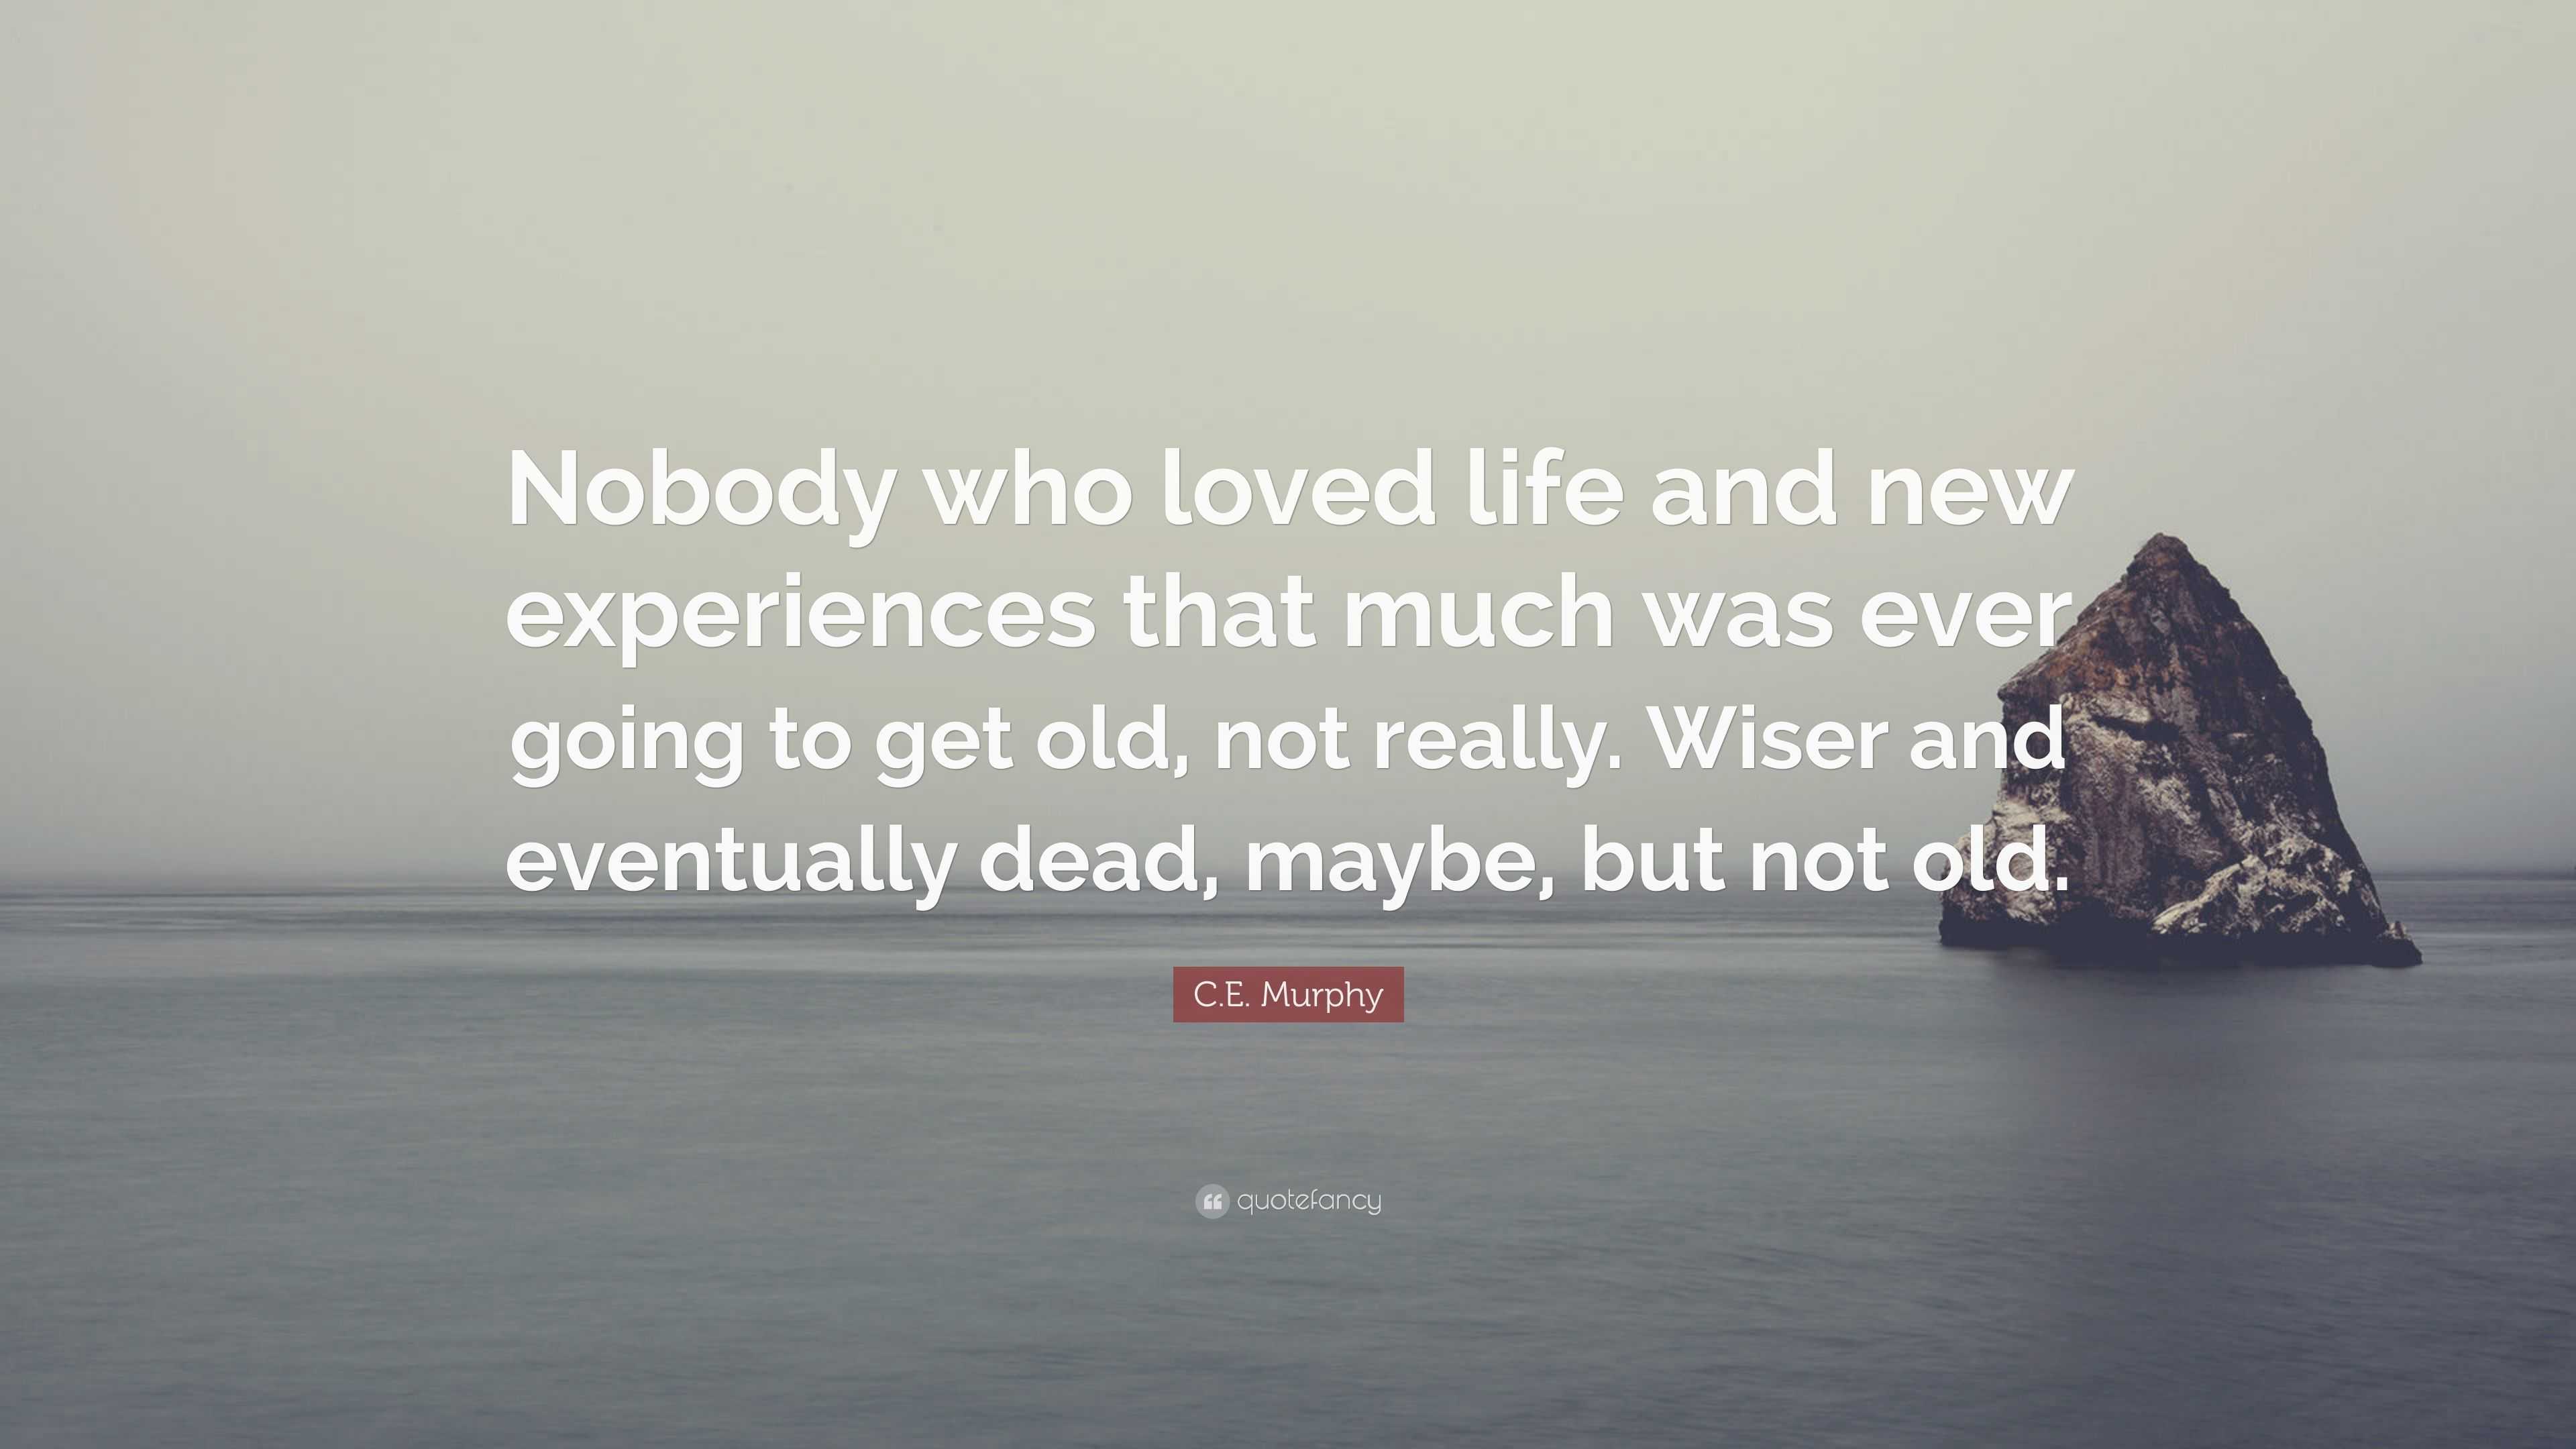 C E Murphy Quote “Nobody who loved life and new experiences that much was ever